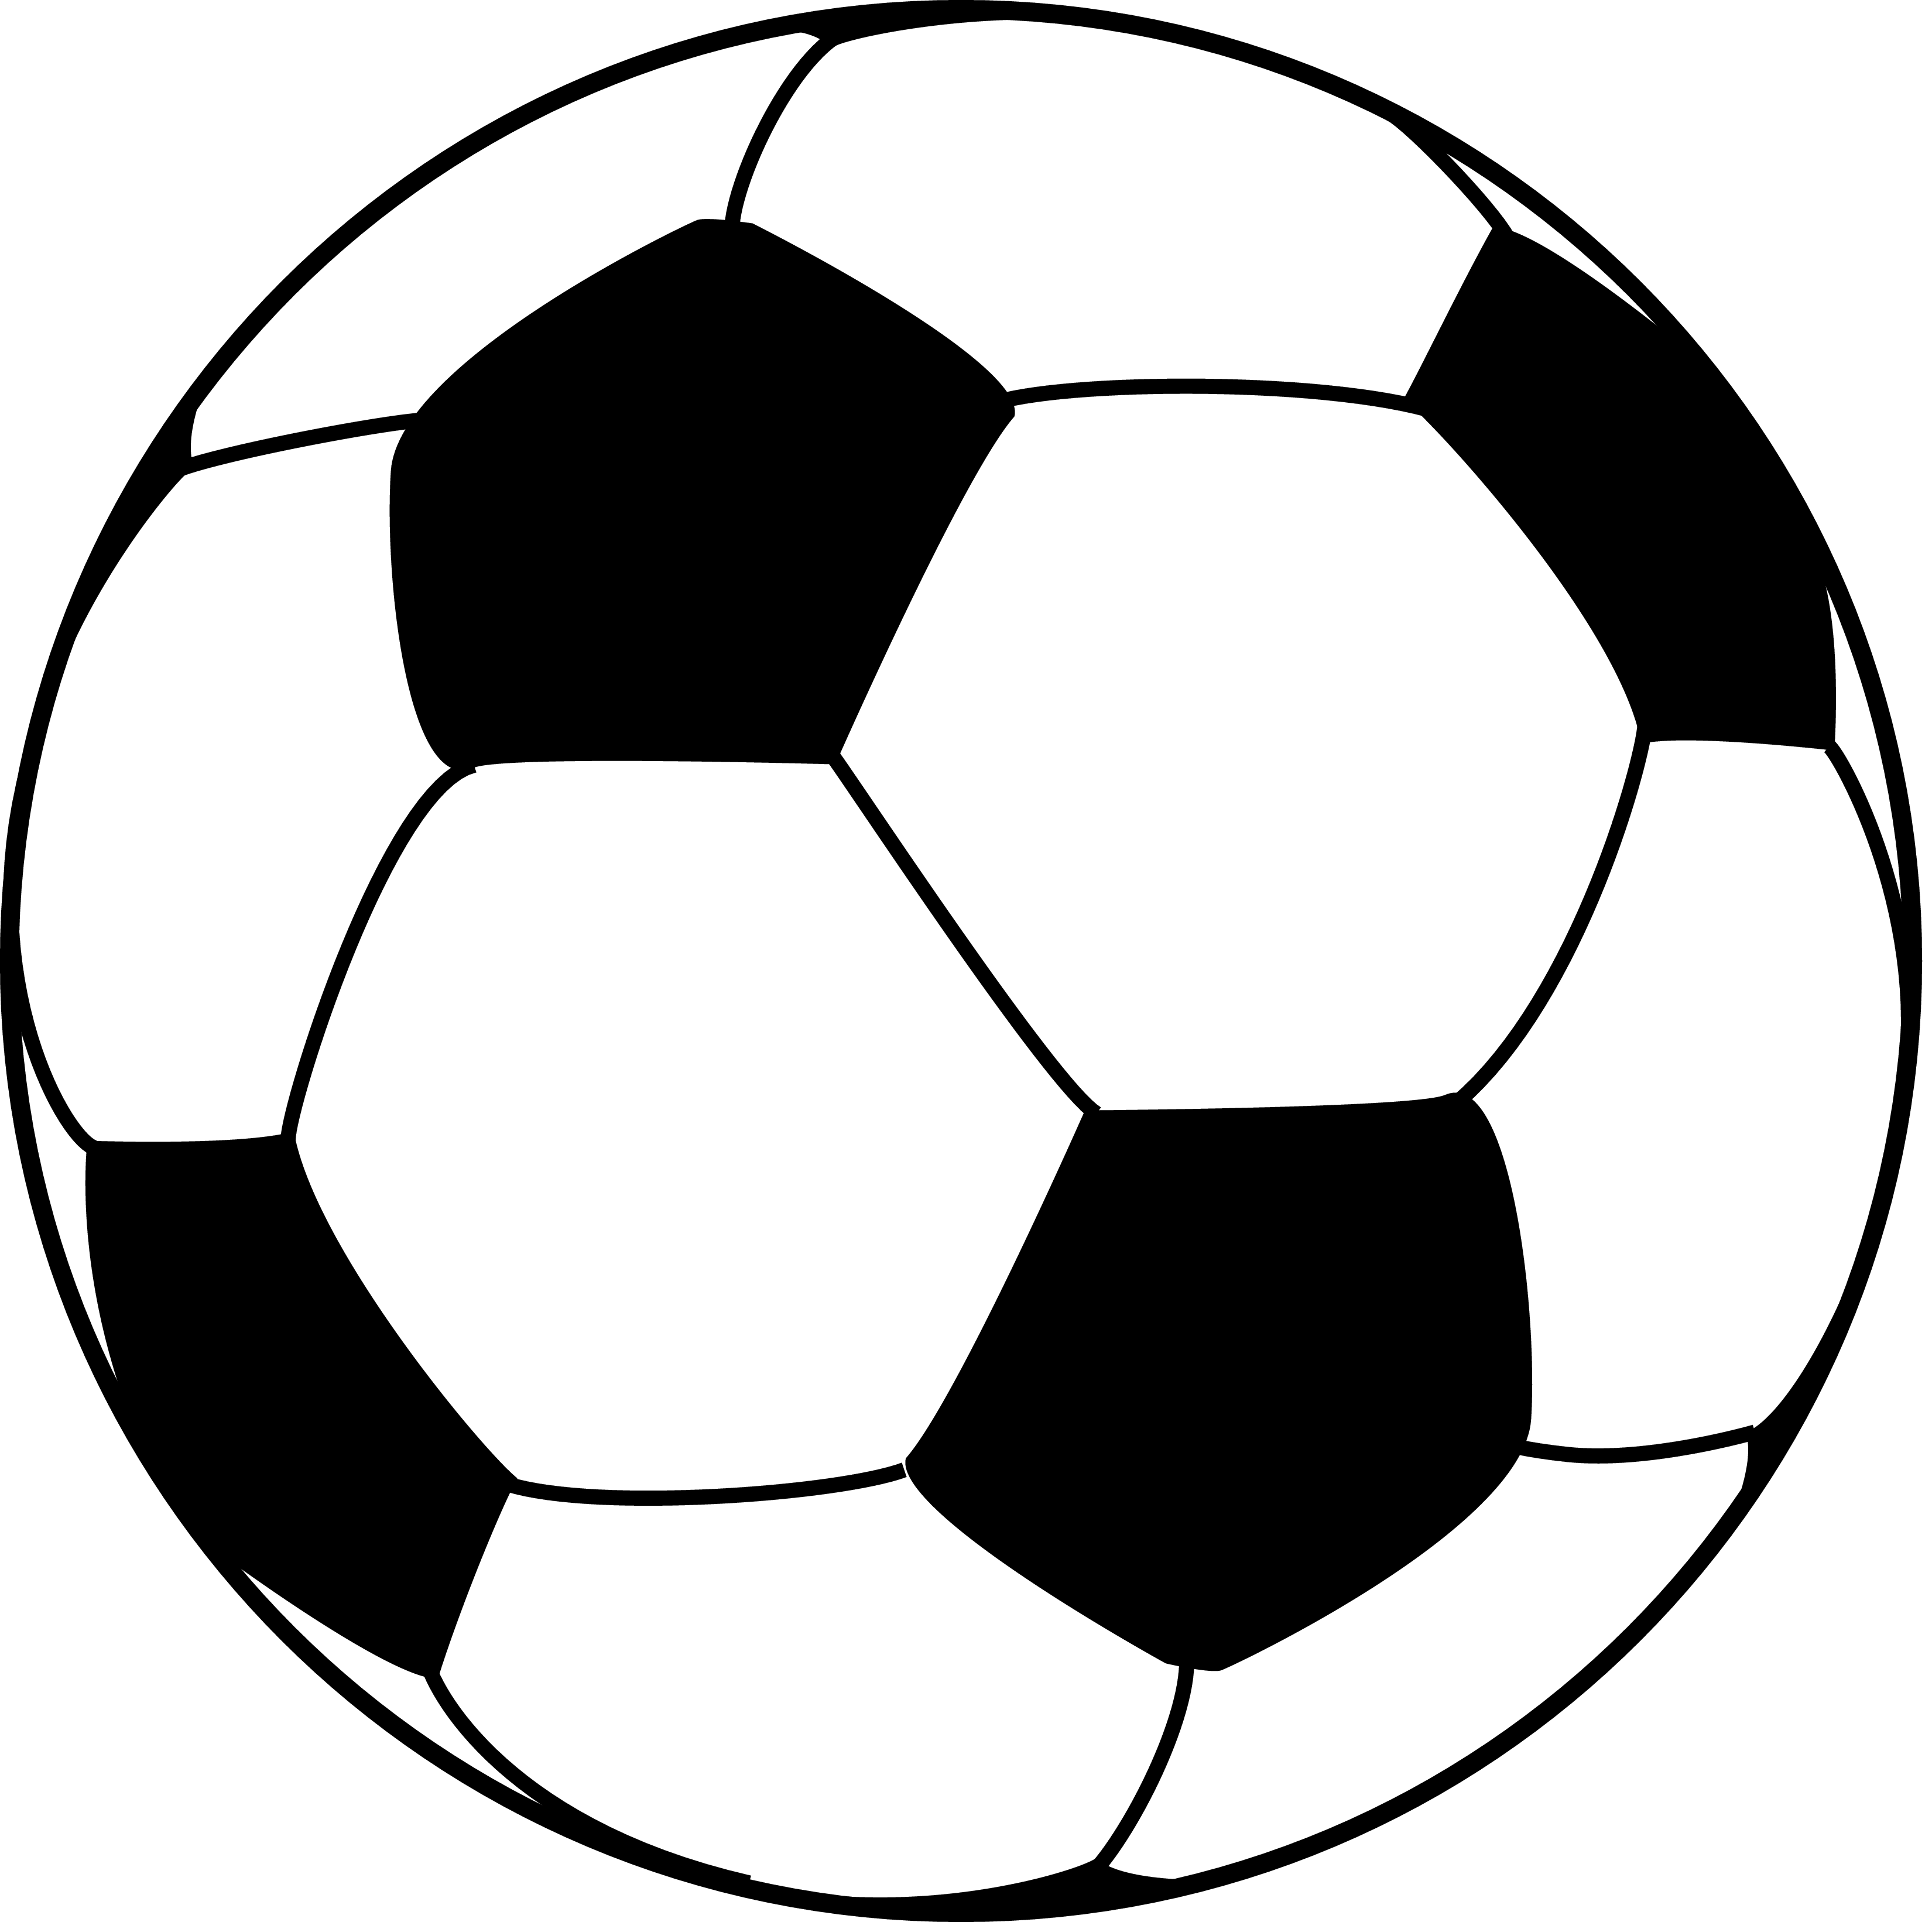 Drawing easy at getdrawings. Clipart box soccer ball